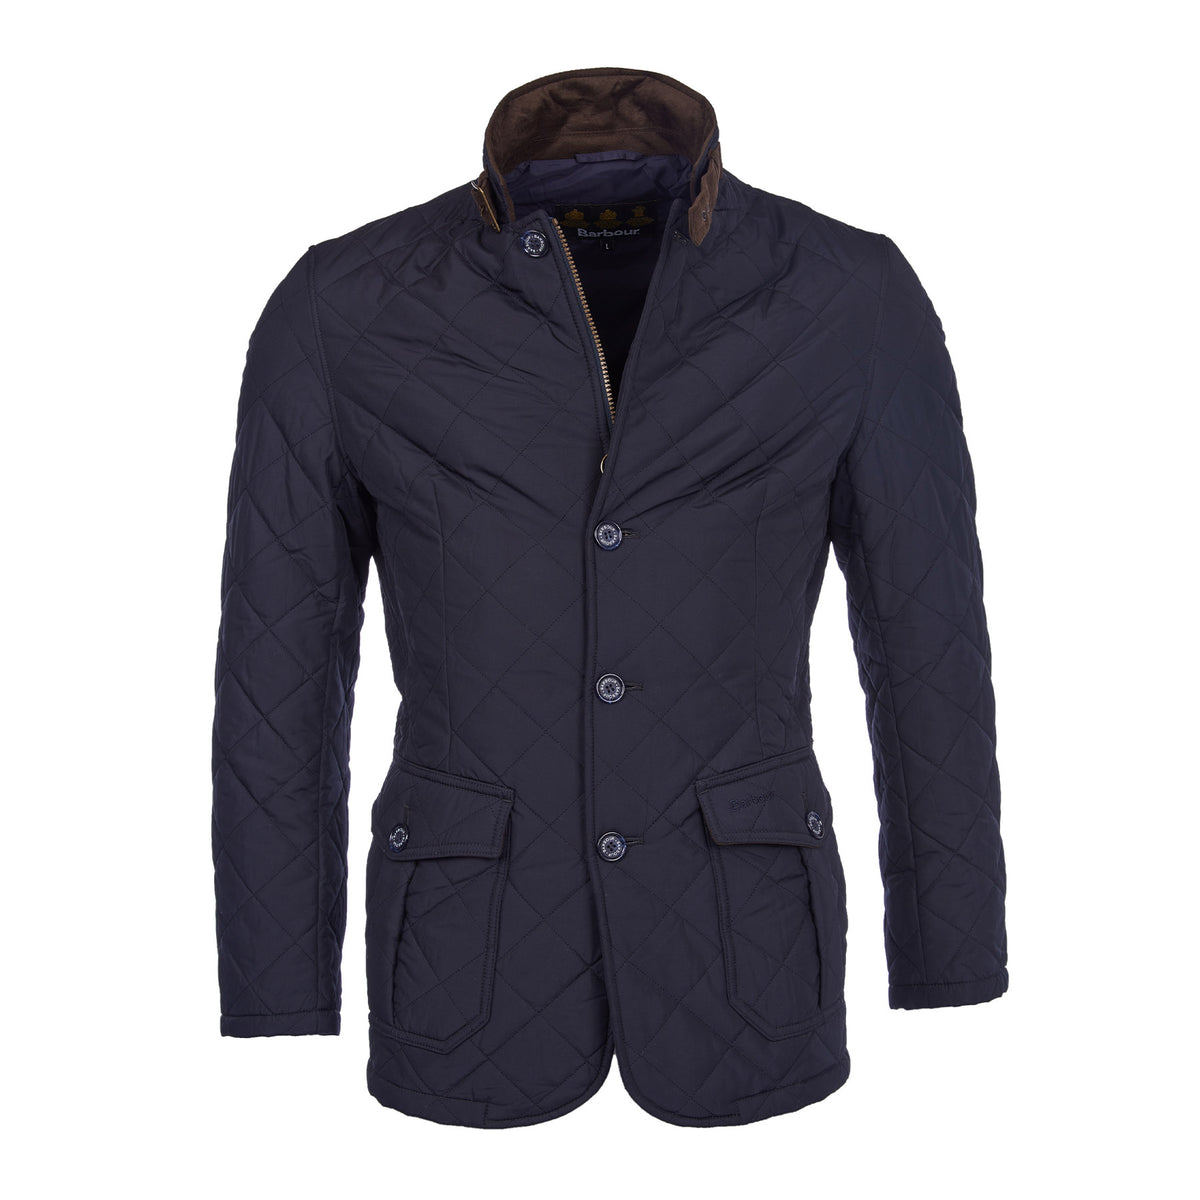 Hero image featuring the Barbour Quilted Lutz jacket in navy with a brown trimmed collar.